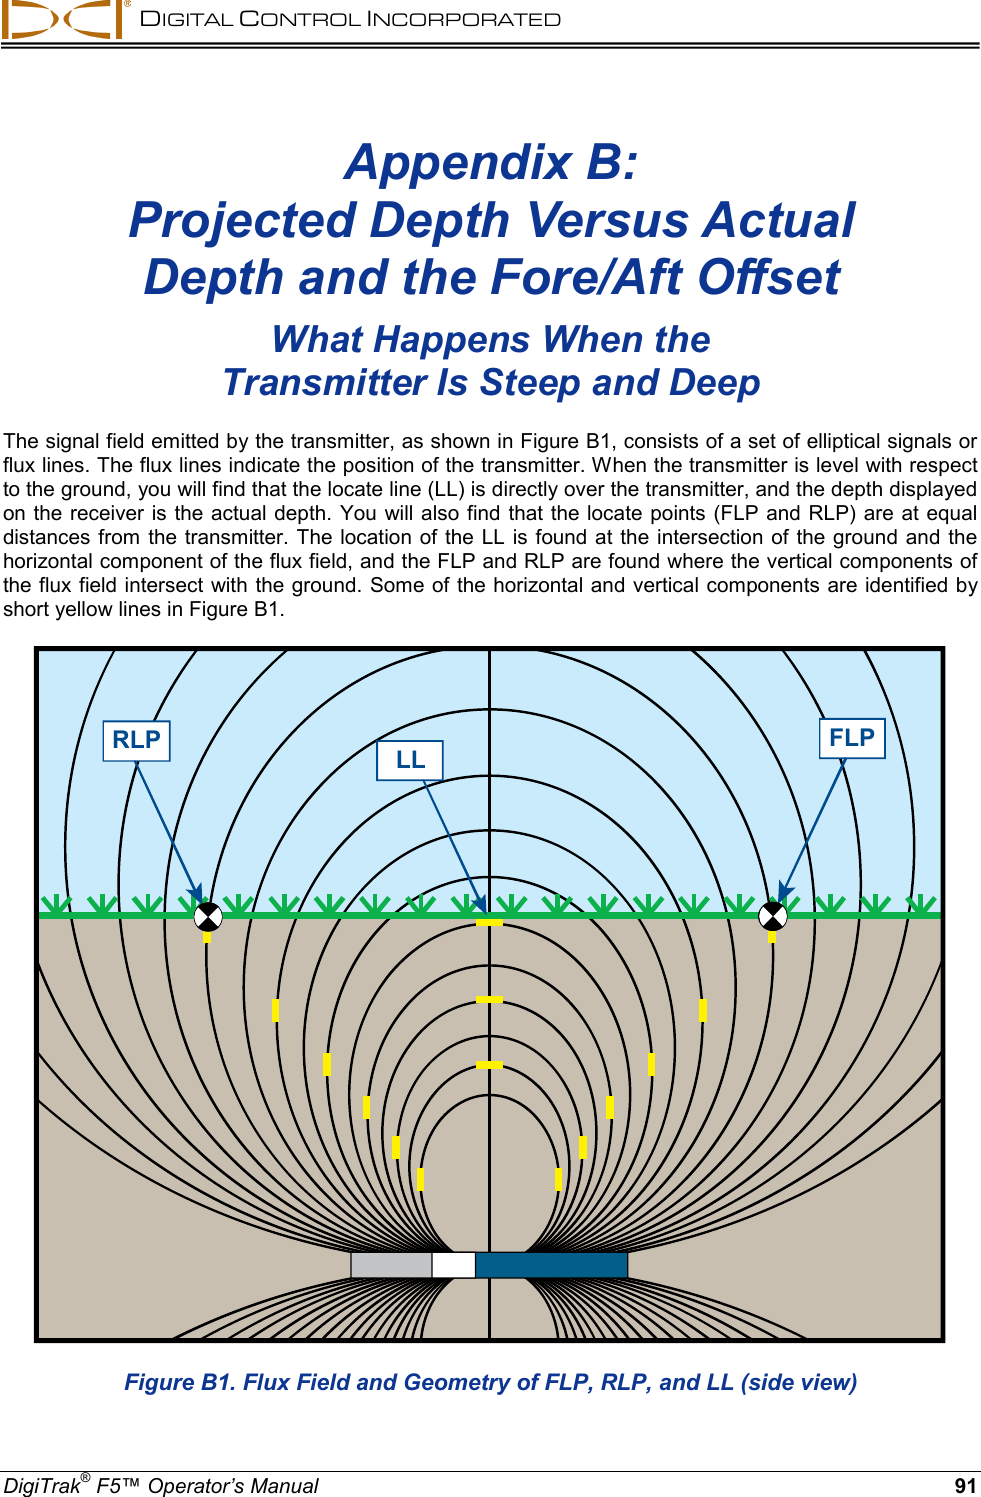  DIGITAL CONTROL INCORPORATED  DigiTrak® F5™ Operator’s Manual 91 Appendix B: Projected Depth Versus Actual Depth and the Fore/Aft Offset  What Happens When the  Transmitter Is Steep and Deep The signal field emitted by the transmitter, as shown in Figure B1, consists of a set of elliptical signals or flux lines. The flux lines indicate the position of the transmitter. When the transmitter is level with respect to the ground, you will find that the locate line (LL) is directly over the transmitter, and the depth displayed on the receiver is the actual depth. You will also find that the locate points (FLP and RLP) are at equal distances  from the transmitter. The location of the LL is found at the intersection of the ground and the horizontal component of the flux field, and the FLP and RLP are found where the vertical components of the flux field intersect with the ground. Some of the horizontal and vertical components are identified by short yellow lines in Figure B1. RLP FLPLL Figure B1. Flux Field and Geometry of FLP, RLP, and LL (side view) 